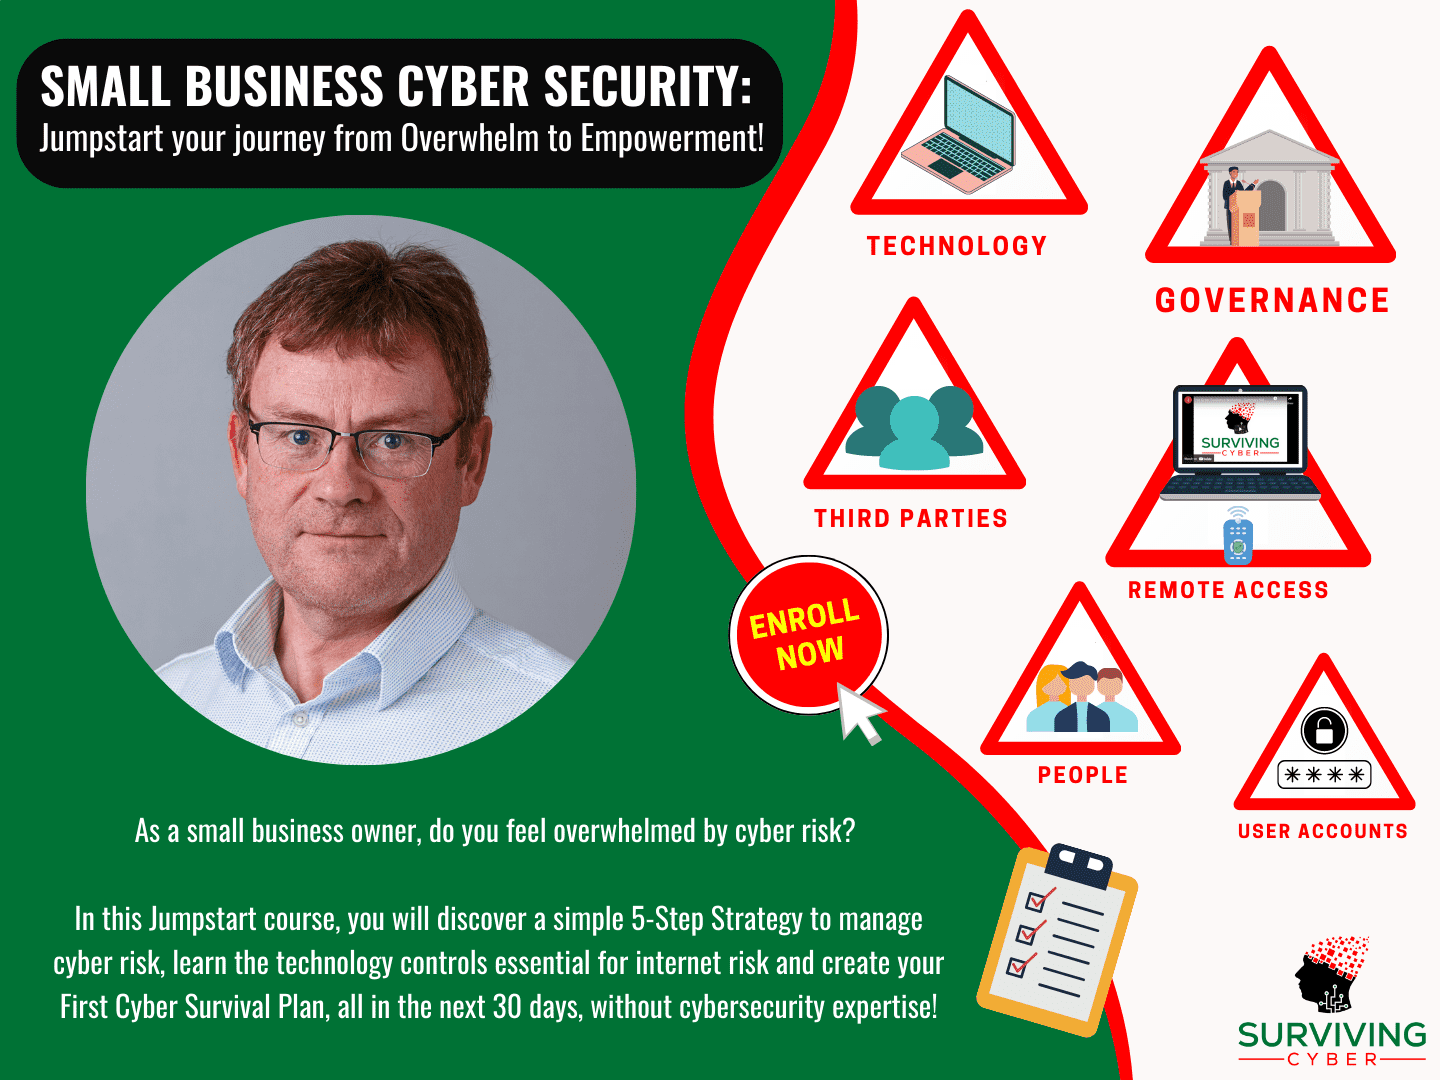 Launch of an entry level Cyber Education Course for Small Business Owners from Surviving Cyber